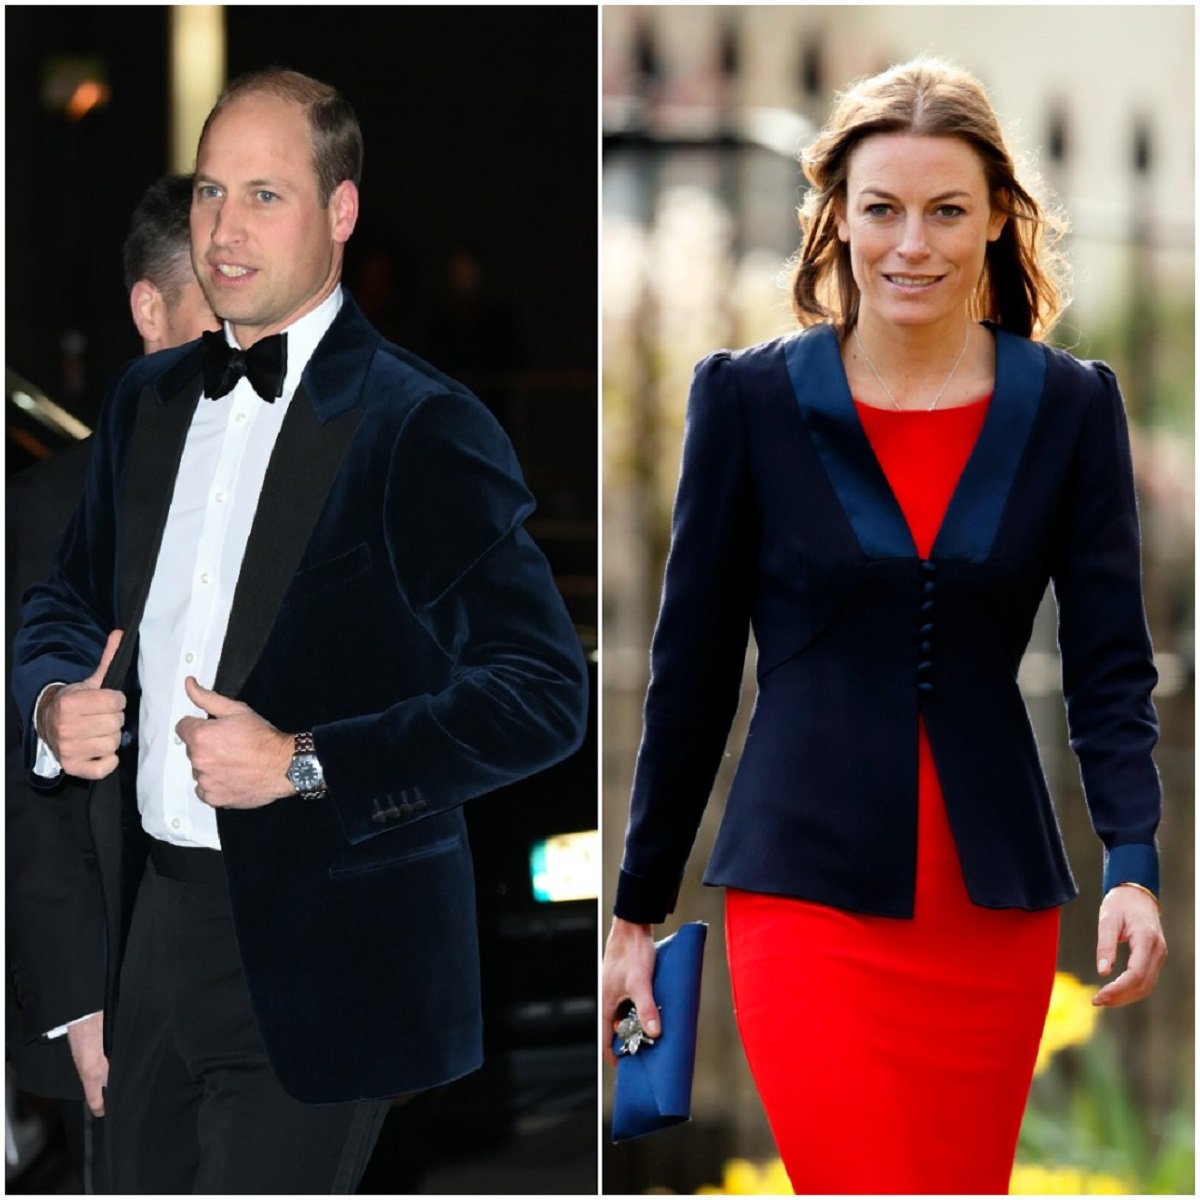 Prince William Had A Pretend Engagement With His Ex Girlfriend Before Asking Kate Middleton To